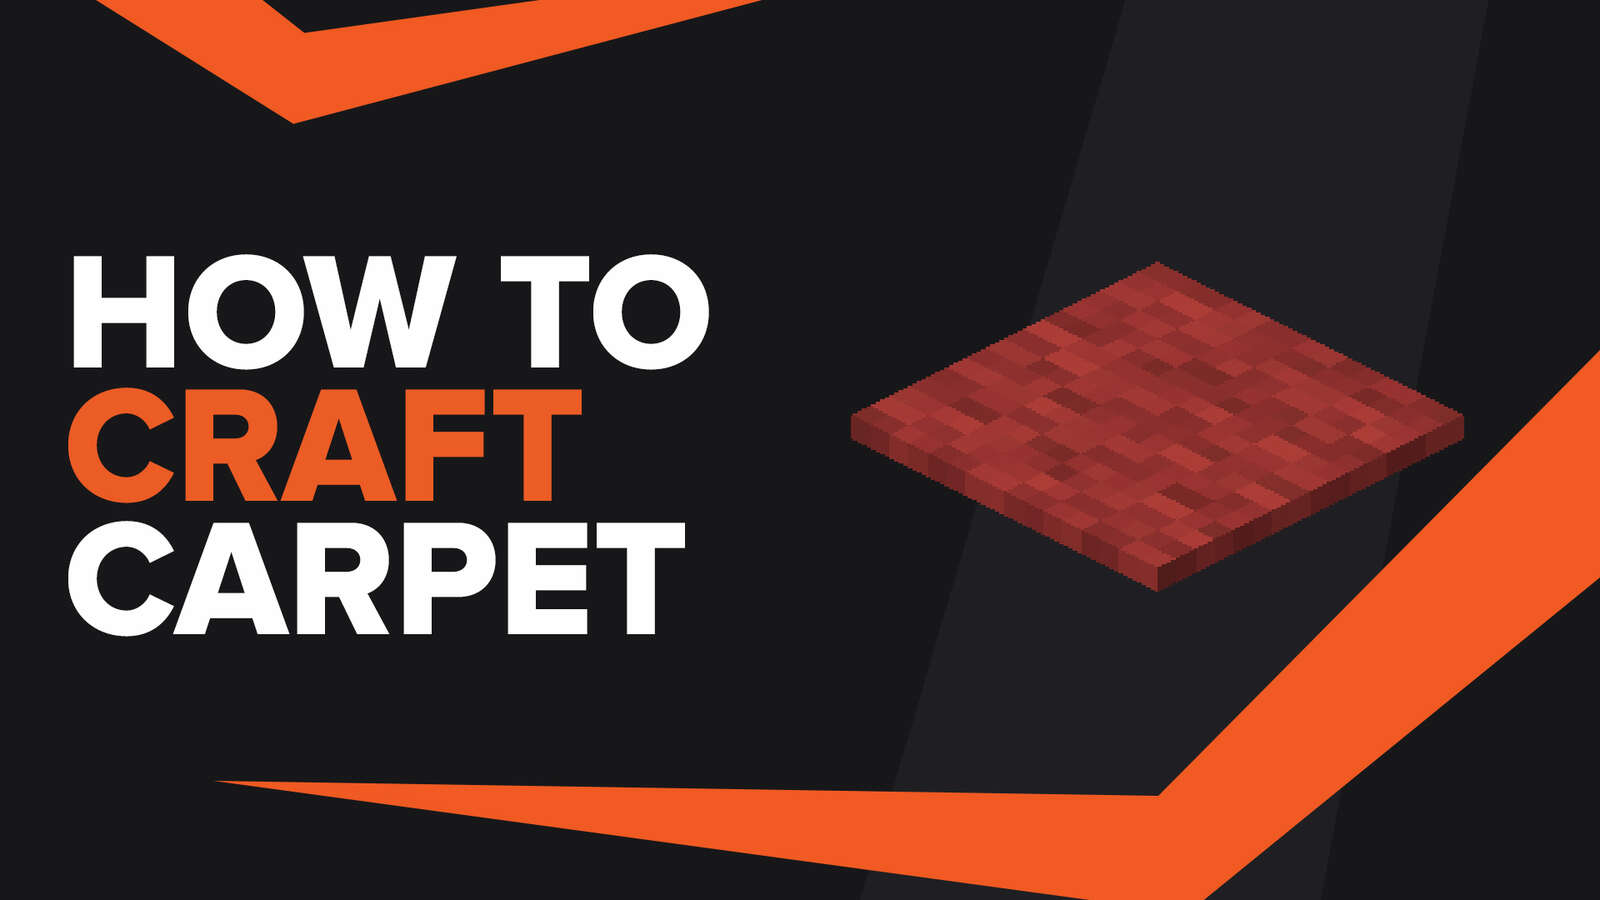 How To Make Carpet In Minecraft